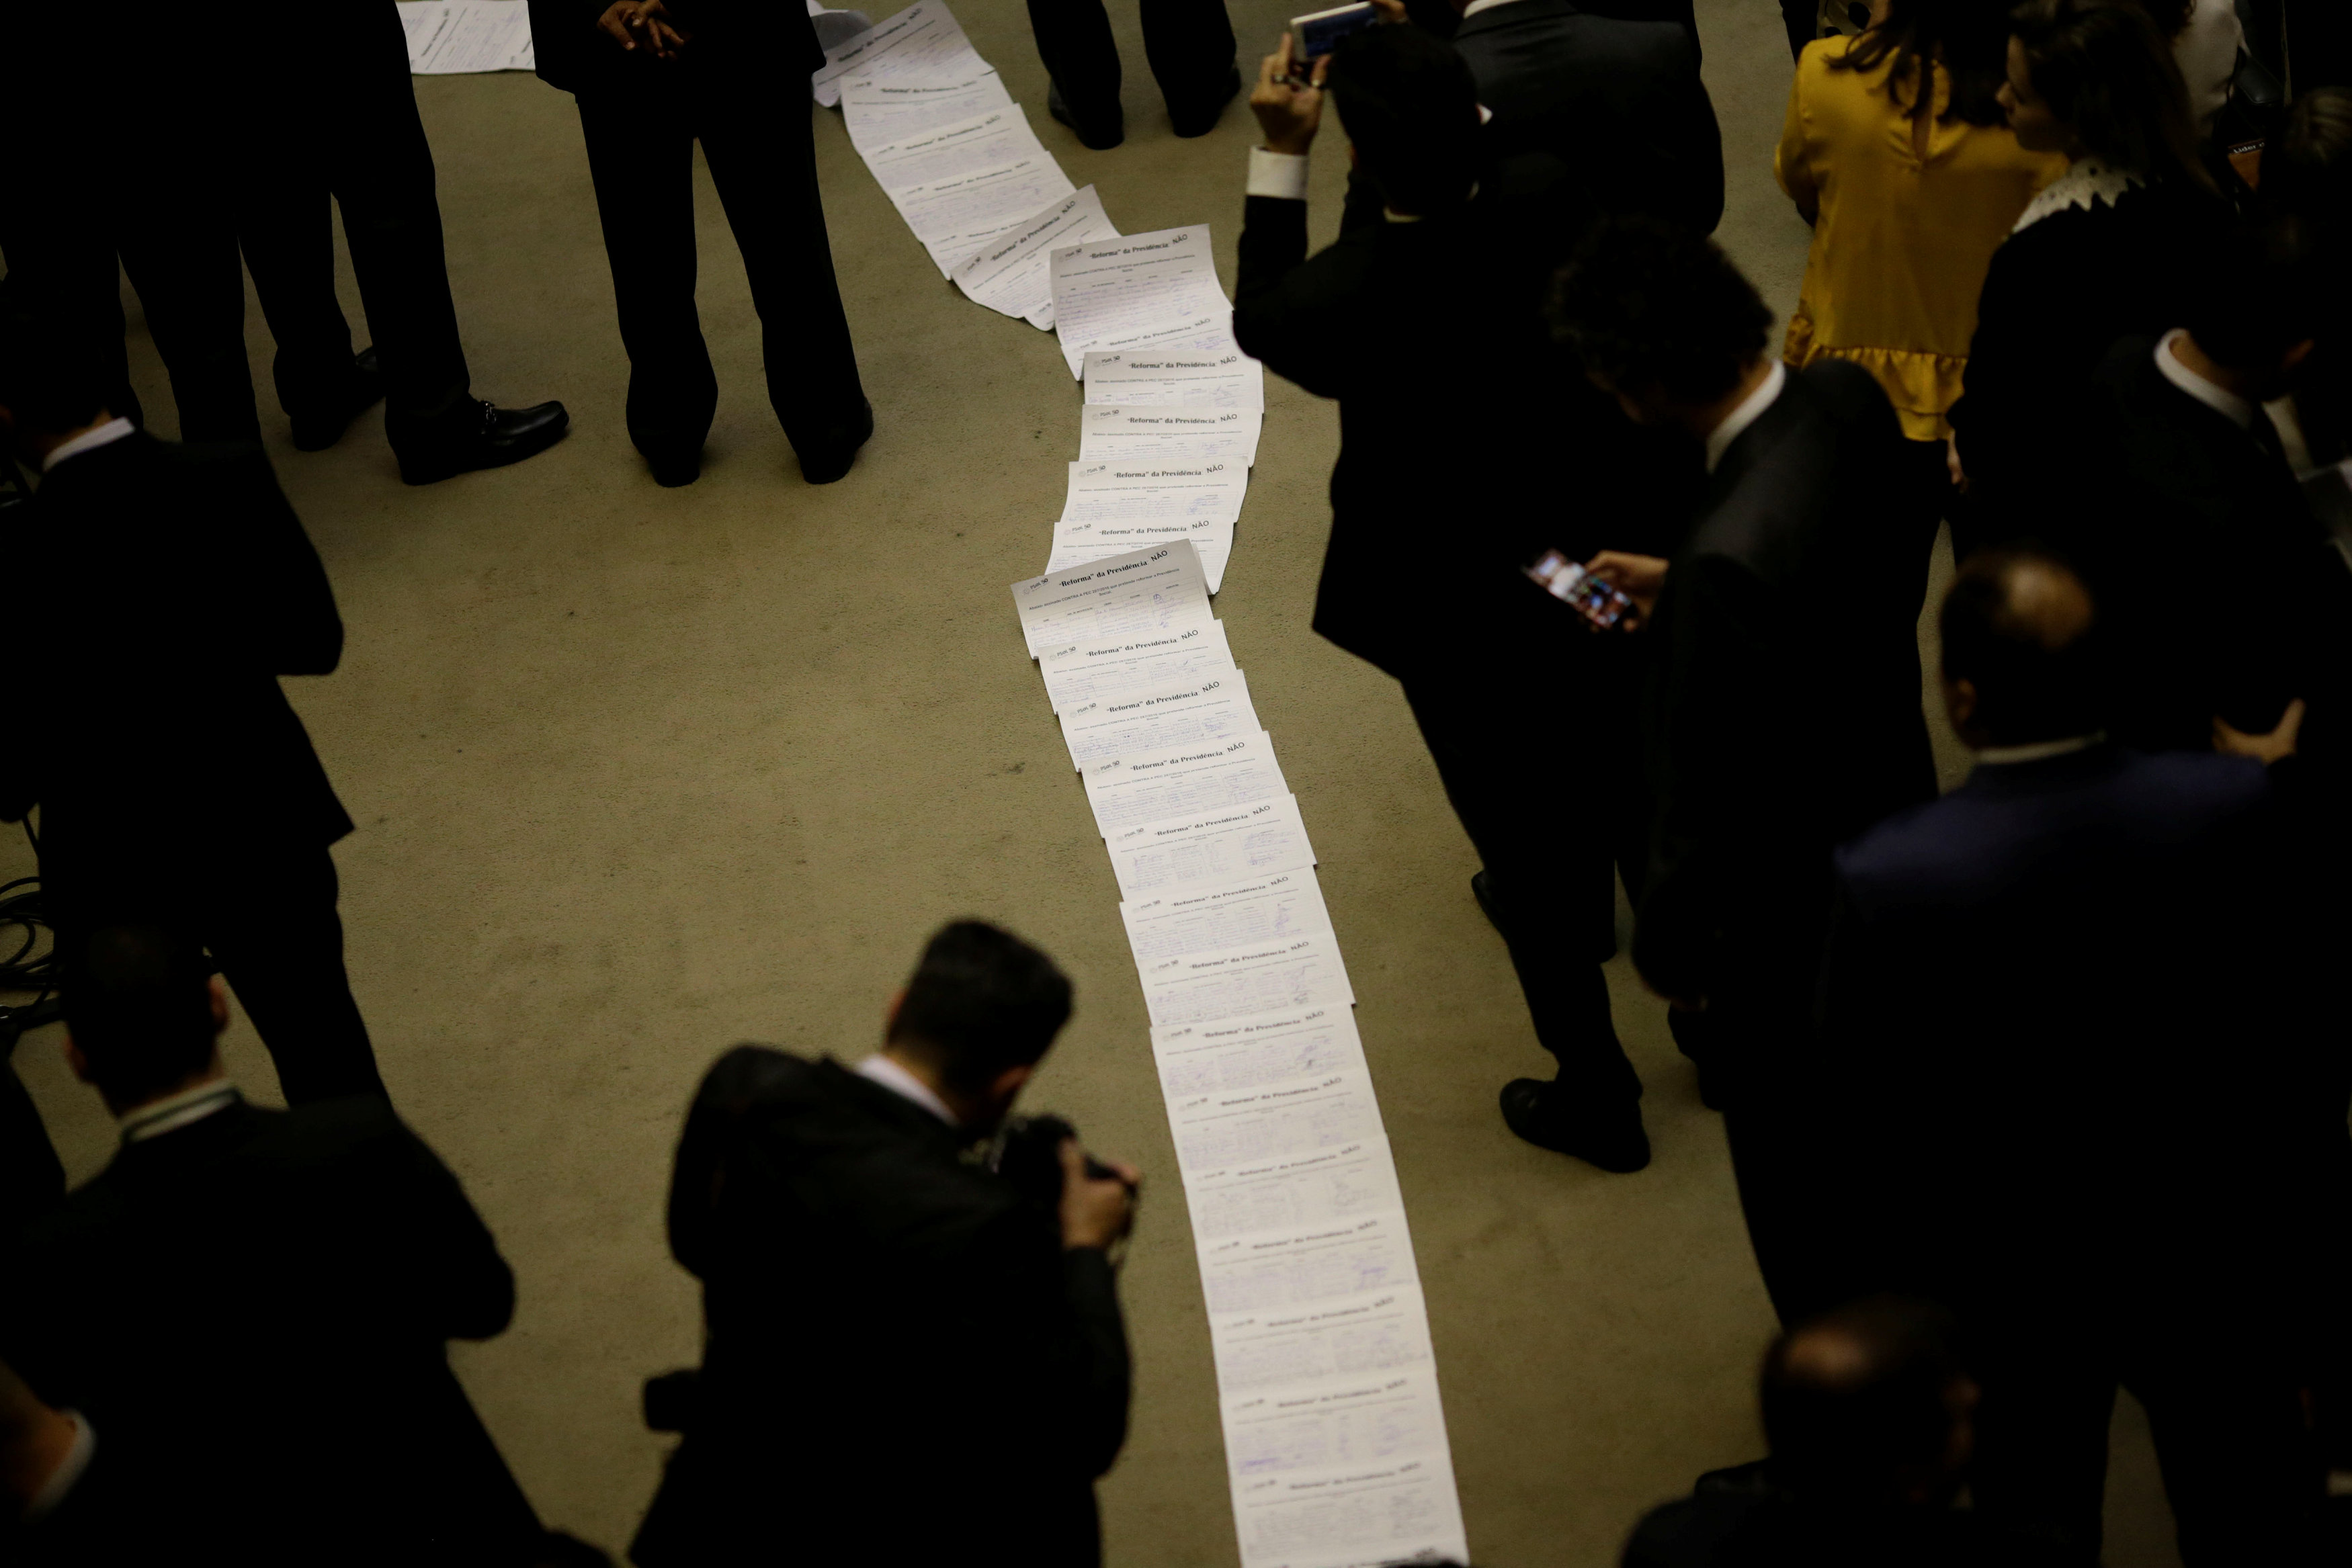 Federal deputies of opposition protest showing signatures against the pension reform during an opening session of the Year of the Legislative, in Brasilia, Brazil, February 5, 2018.